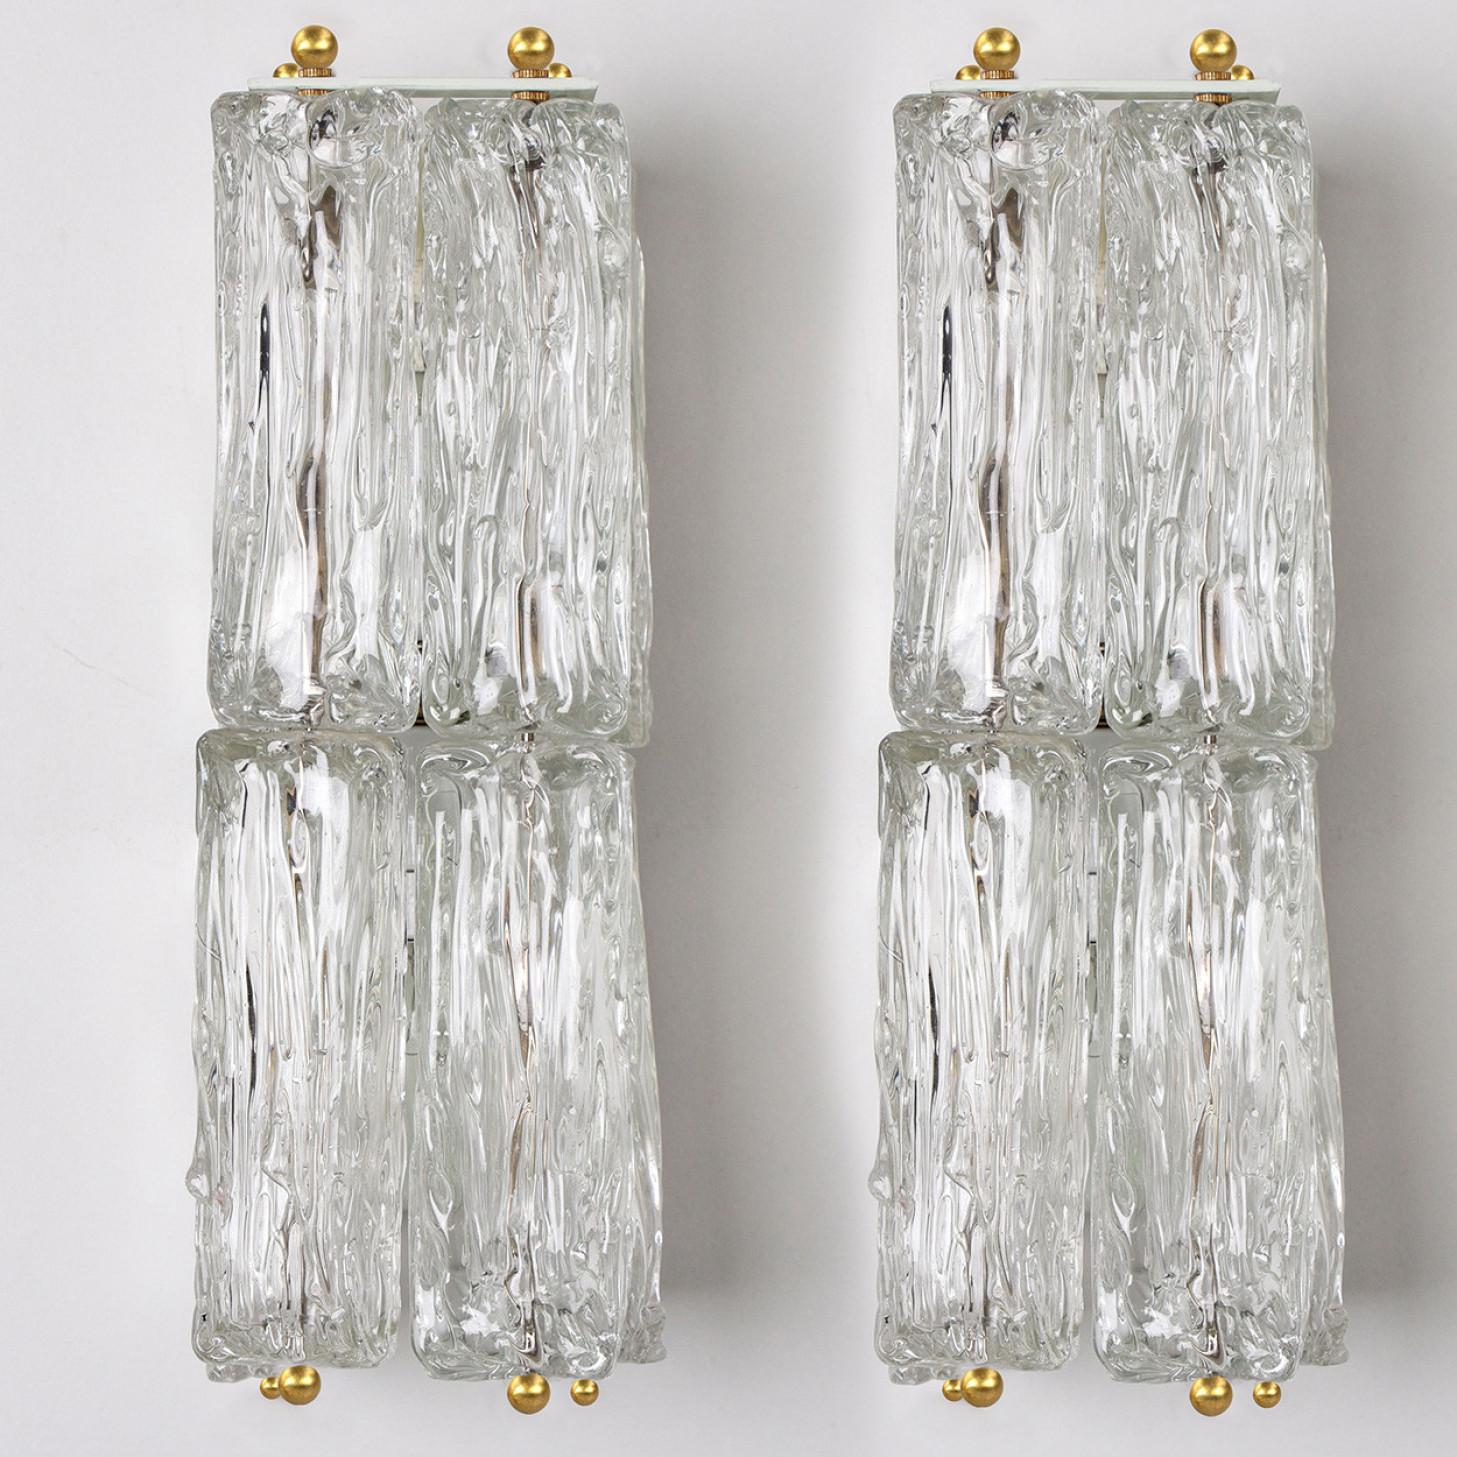 Pair of wall light fixtures by J.T. Kalmar, Vienna, Austria, manufactured in circa 1960. The glass shows a beautiful ice-like texture, which gives a diffuse light effect and a nice pattern on the ceiling and wall. It looks like the light is divided